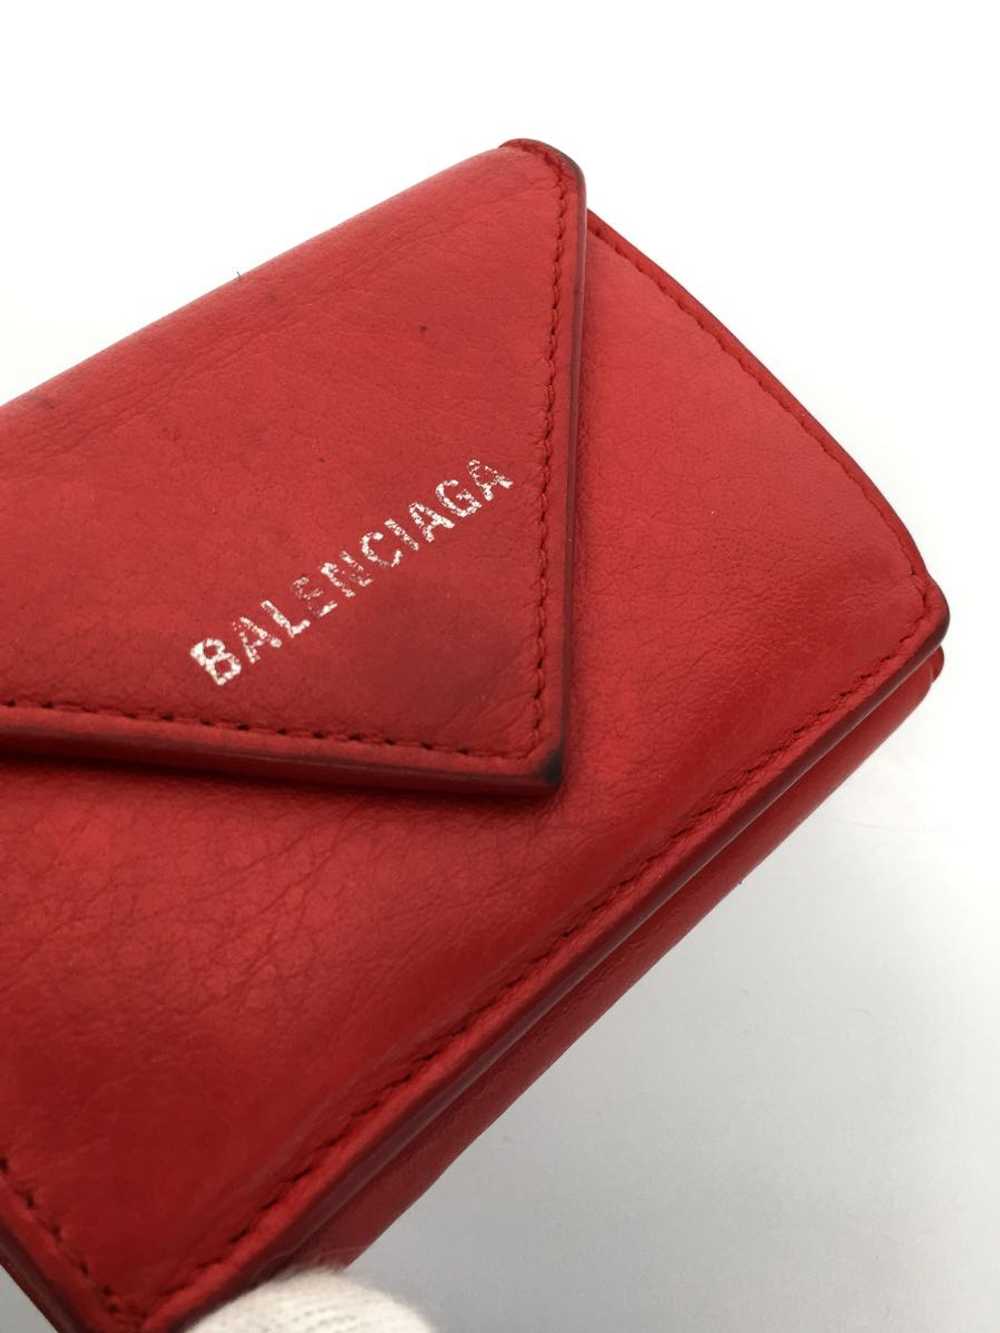 Balenciaga Trifold Wallet Leather Red Women - image 7